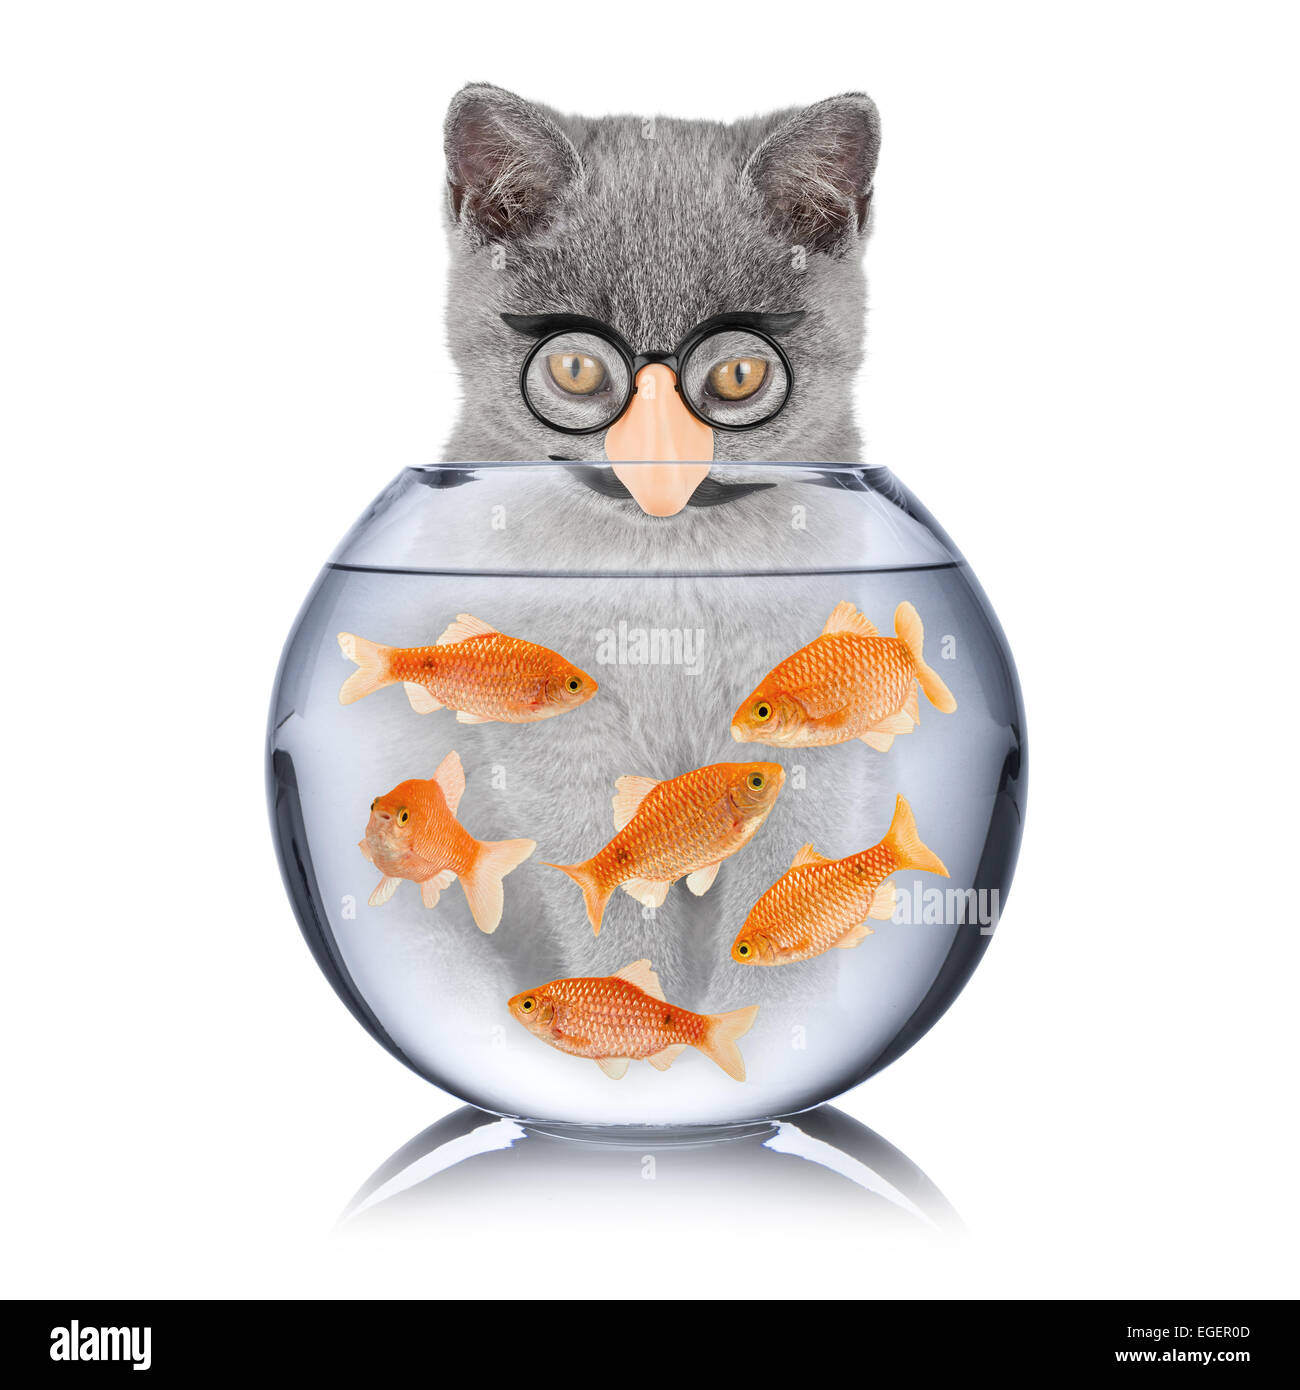 cat with false nose looking into fish bowl Stock Photo